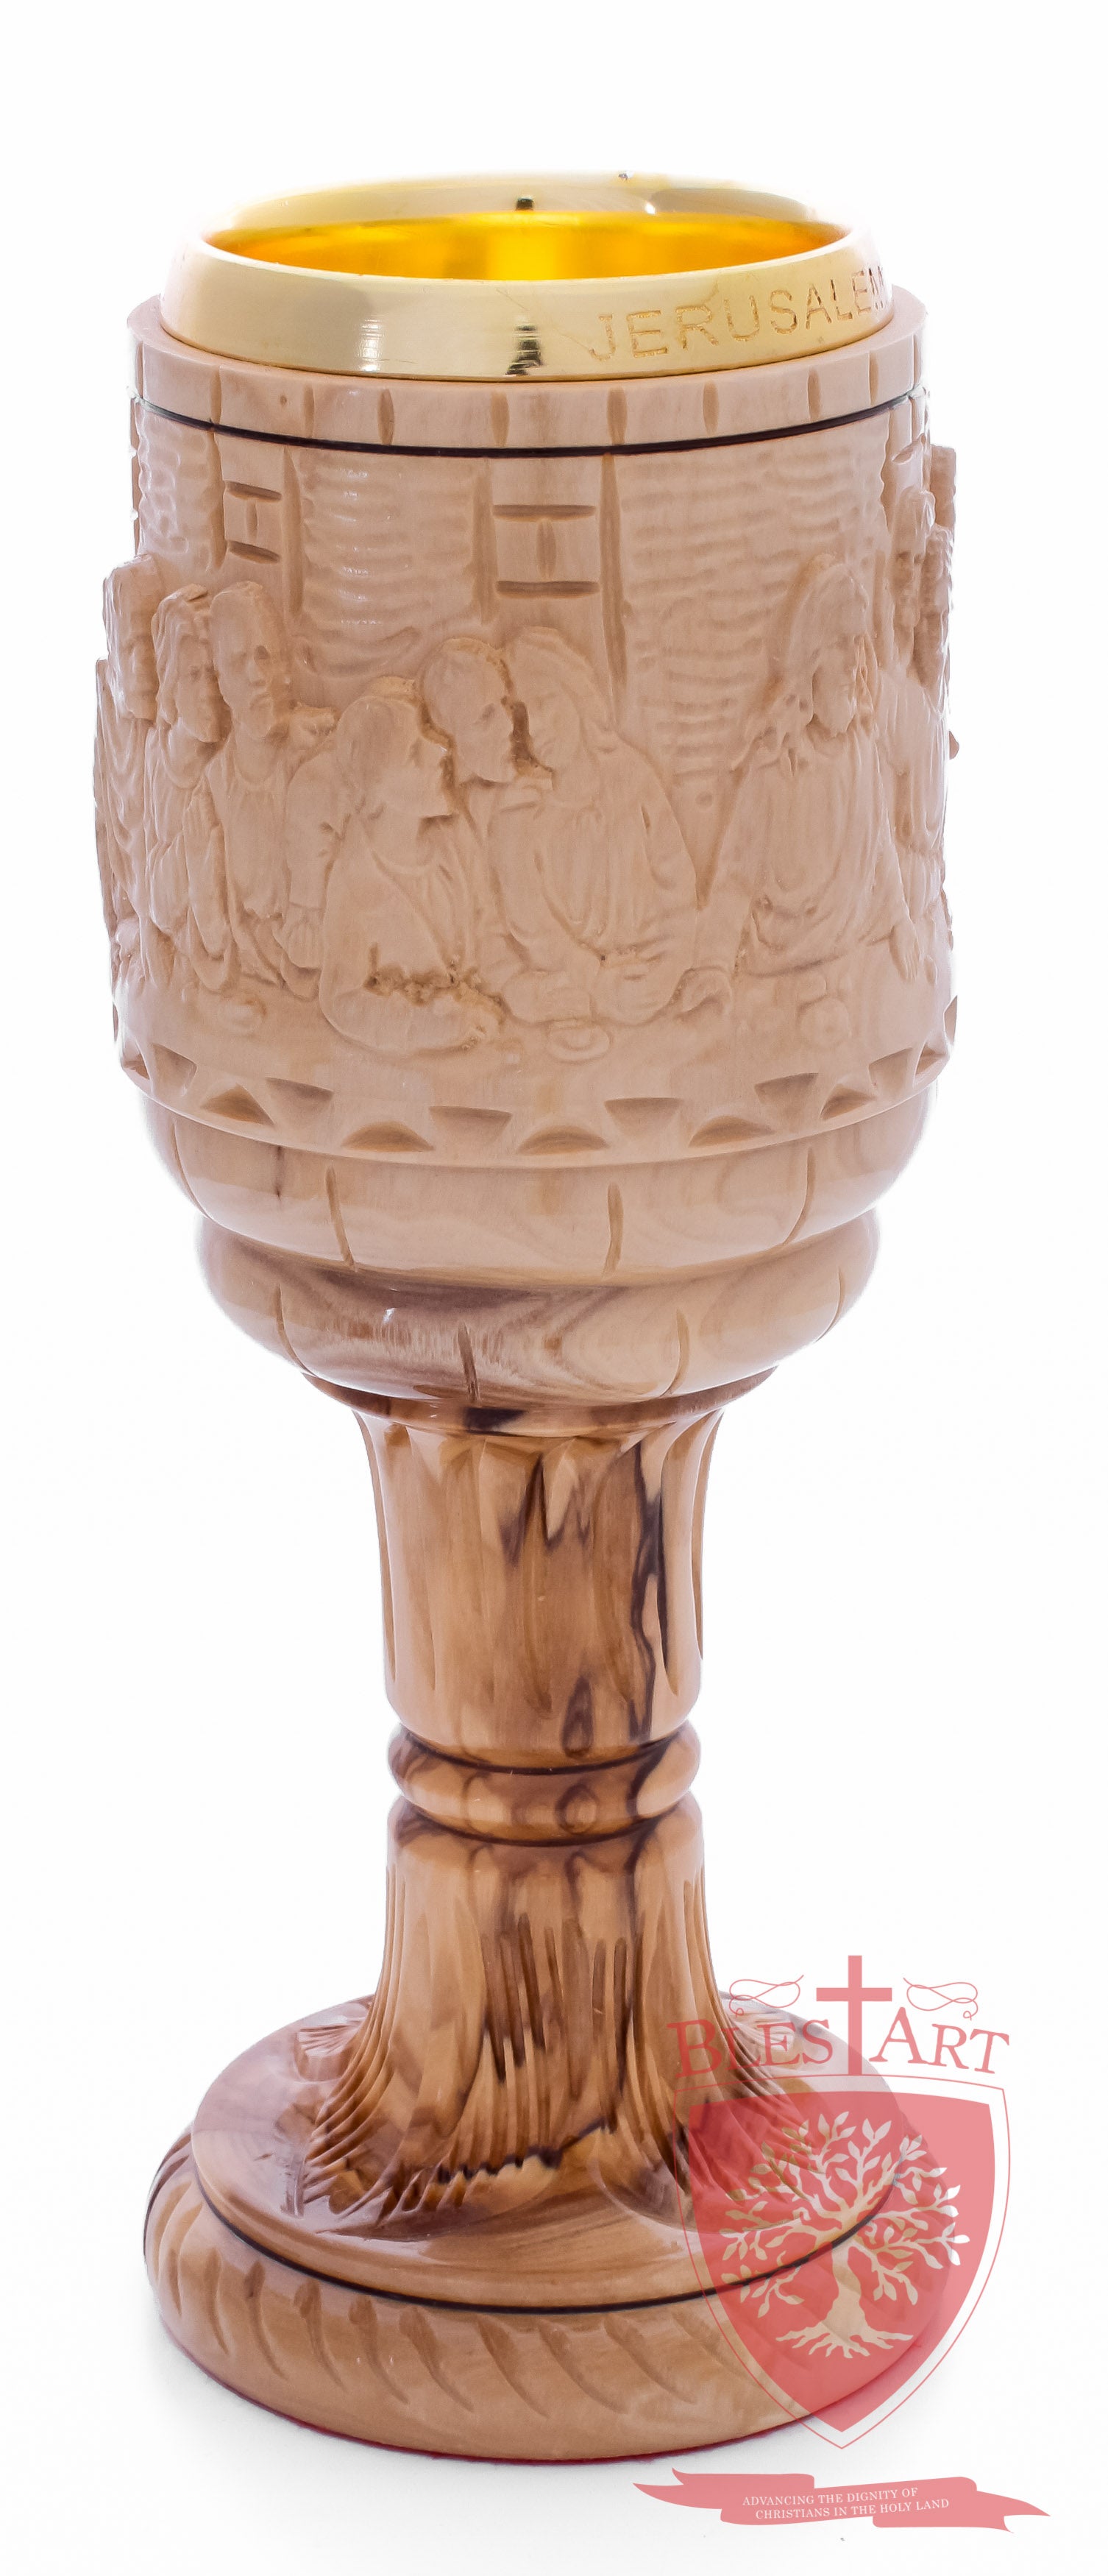 Chalice with the carving of the Last Supper image